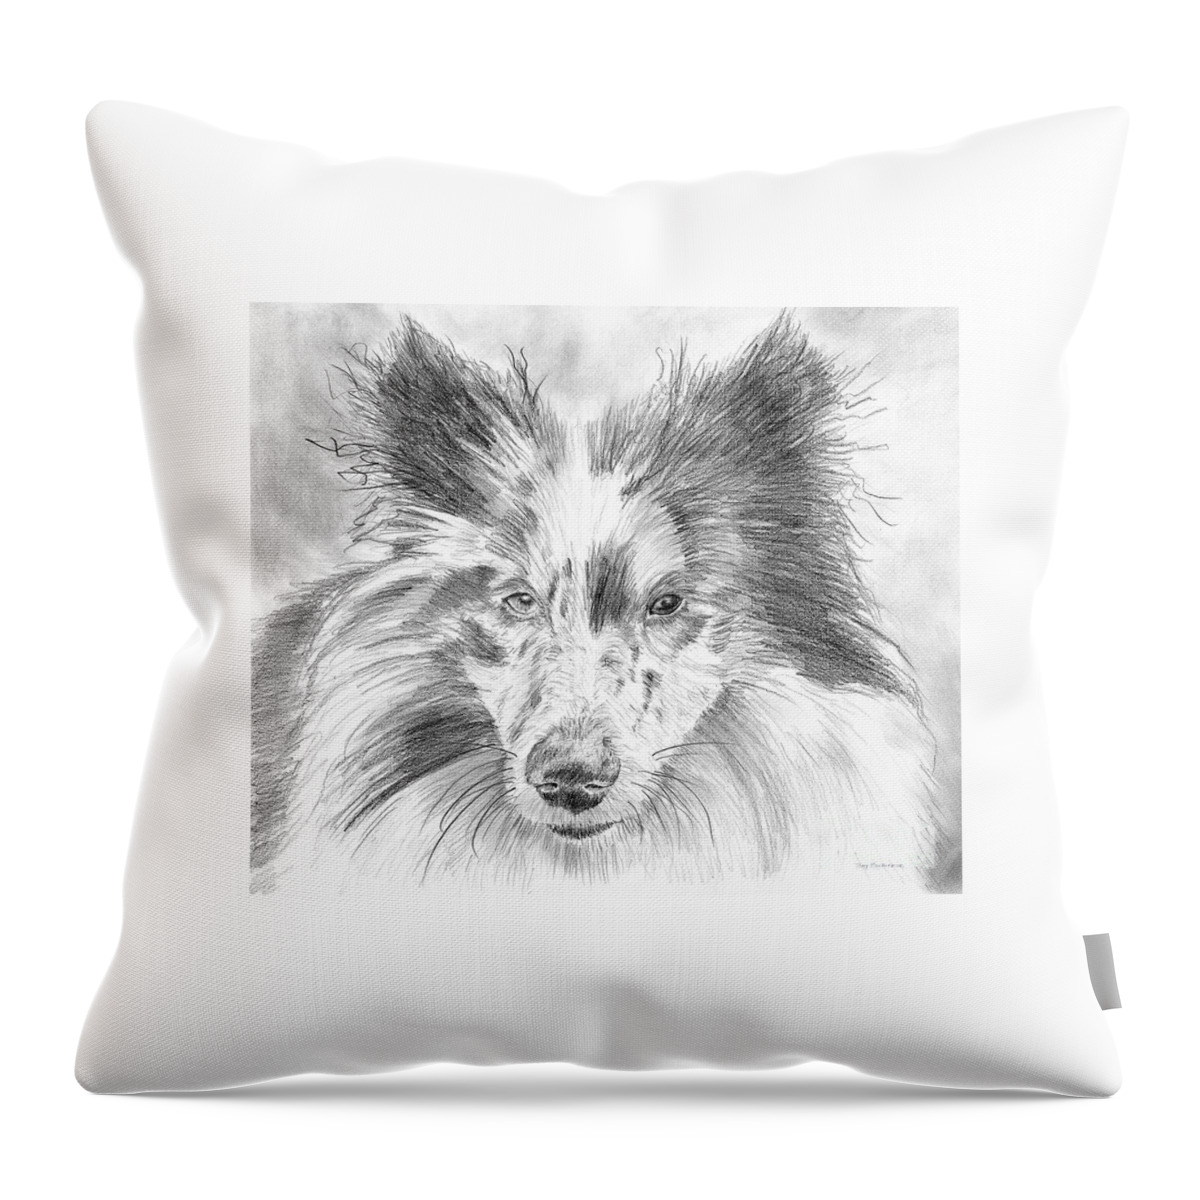 Schooner Throw Pillow featuring the painting Blue Merle Sheltie Graphite Drawing by Amy Kirkpatrick